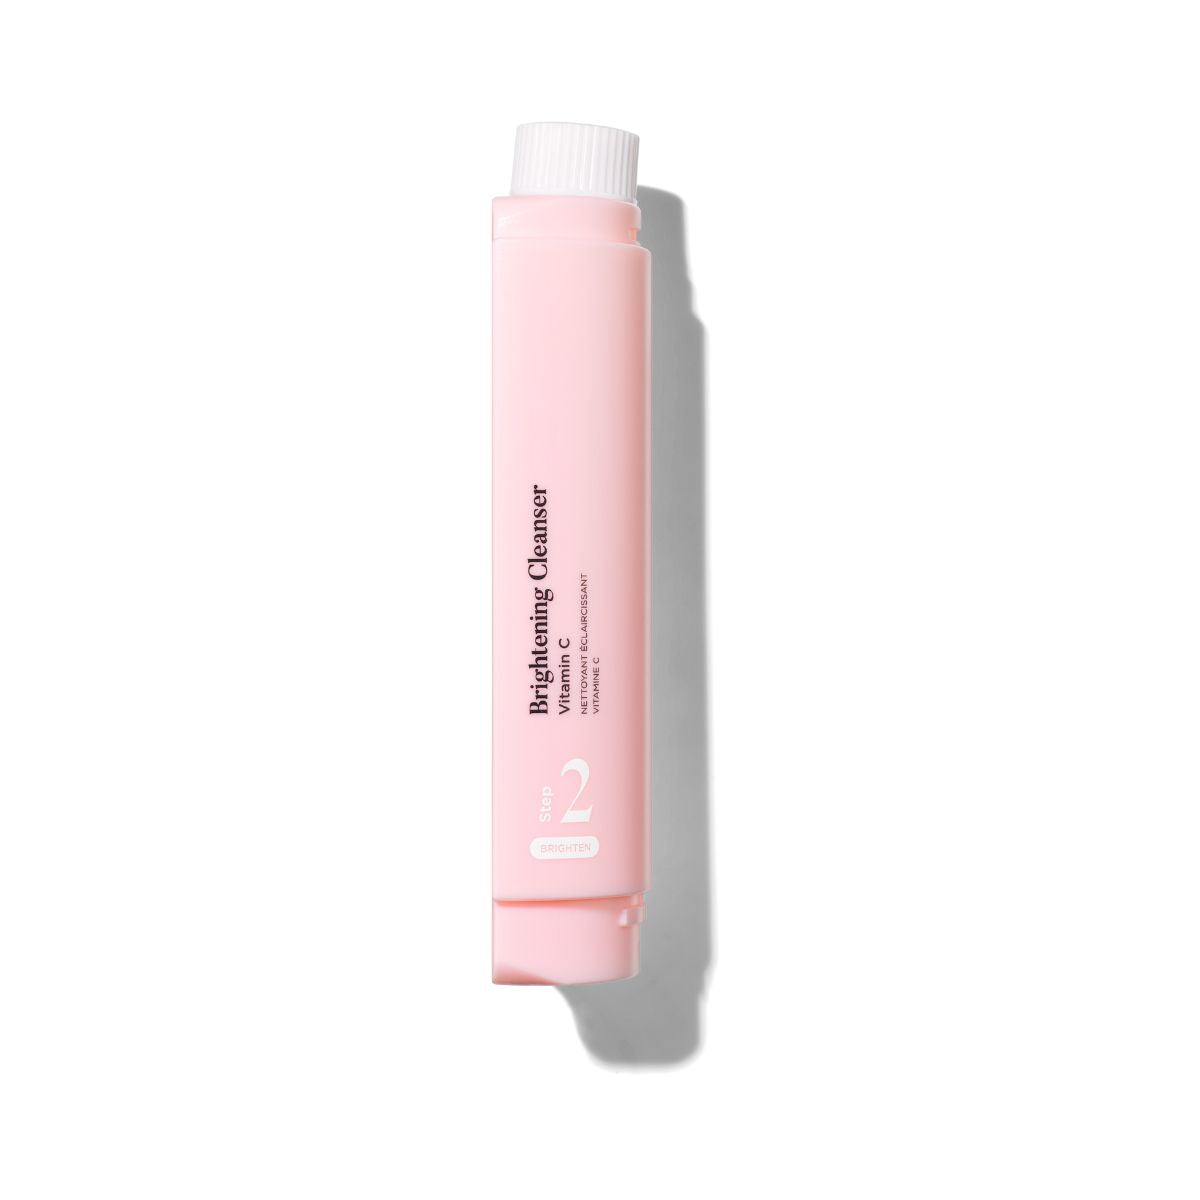 Sculpted DuoCleanse Brightening Cleanser Refill